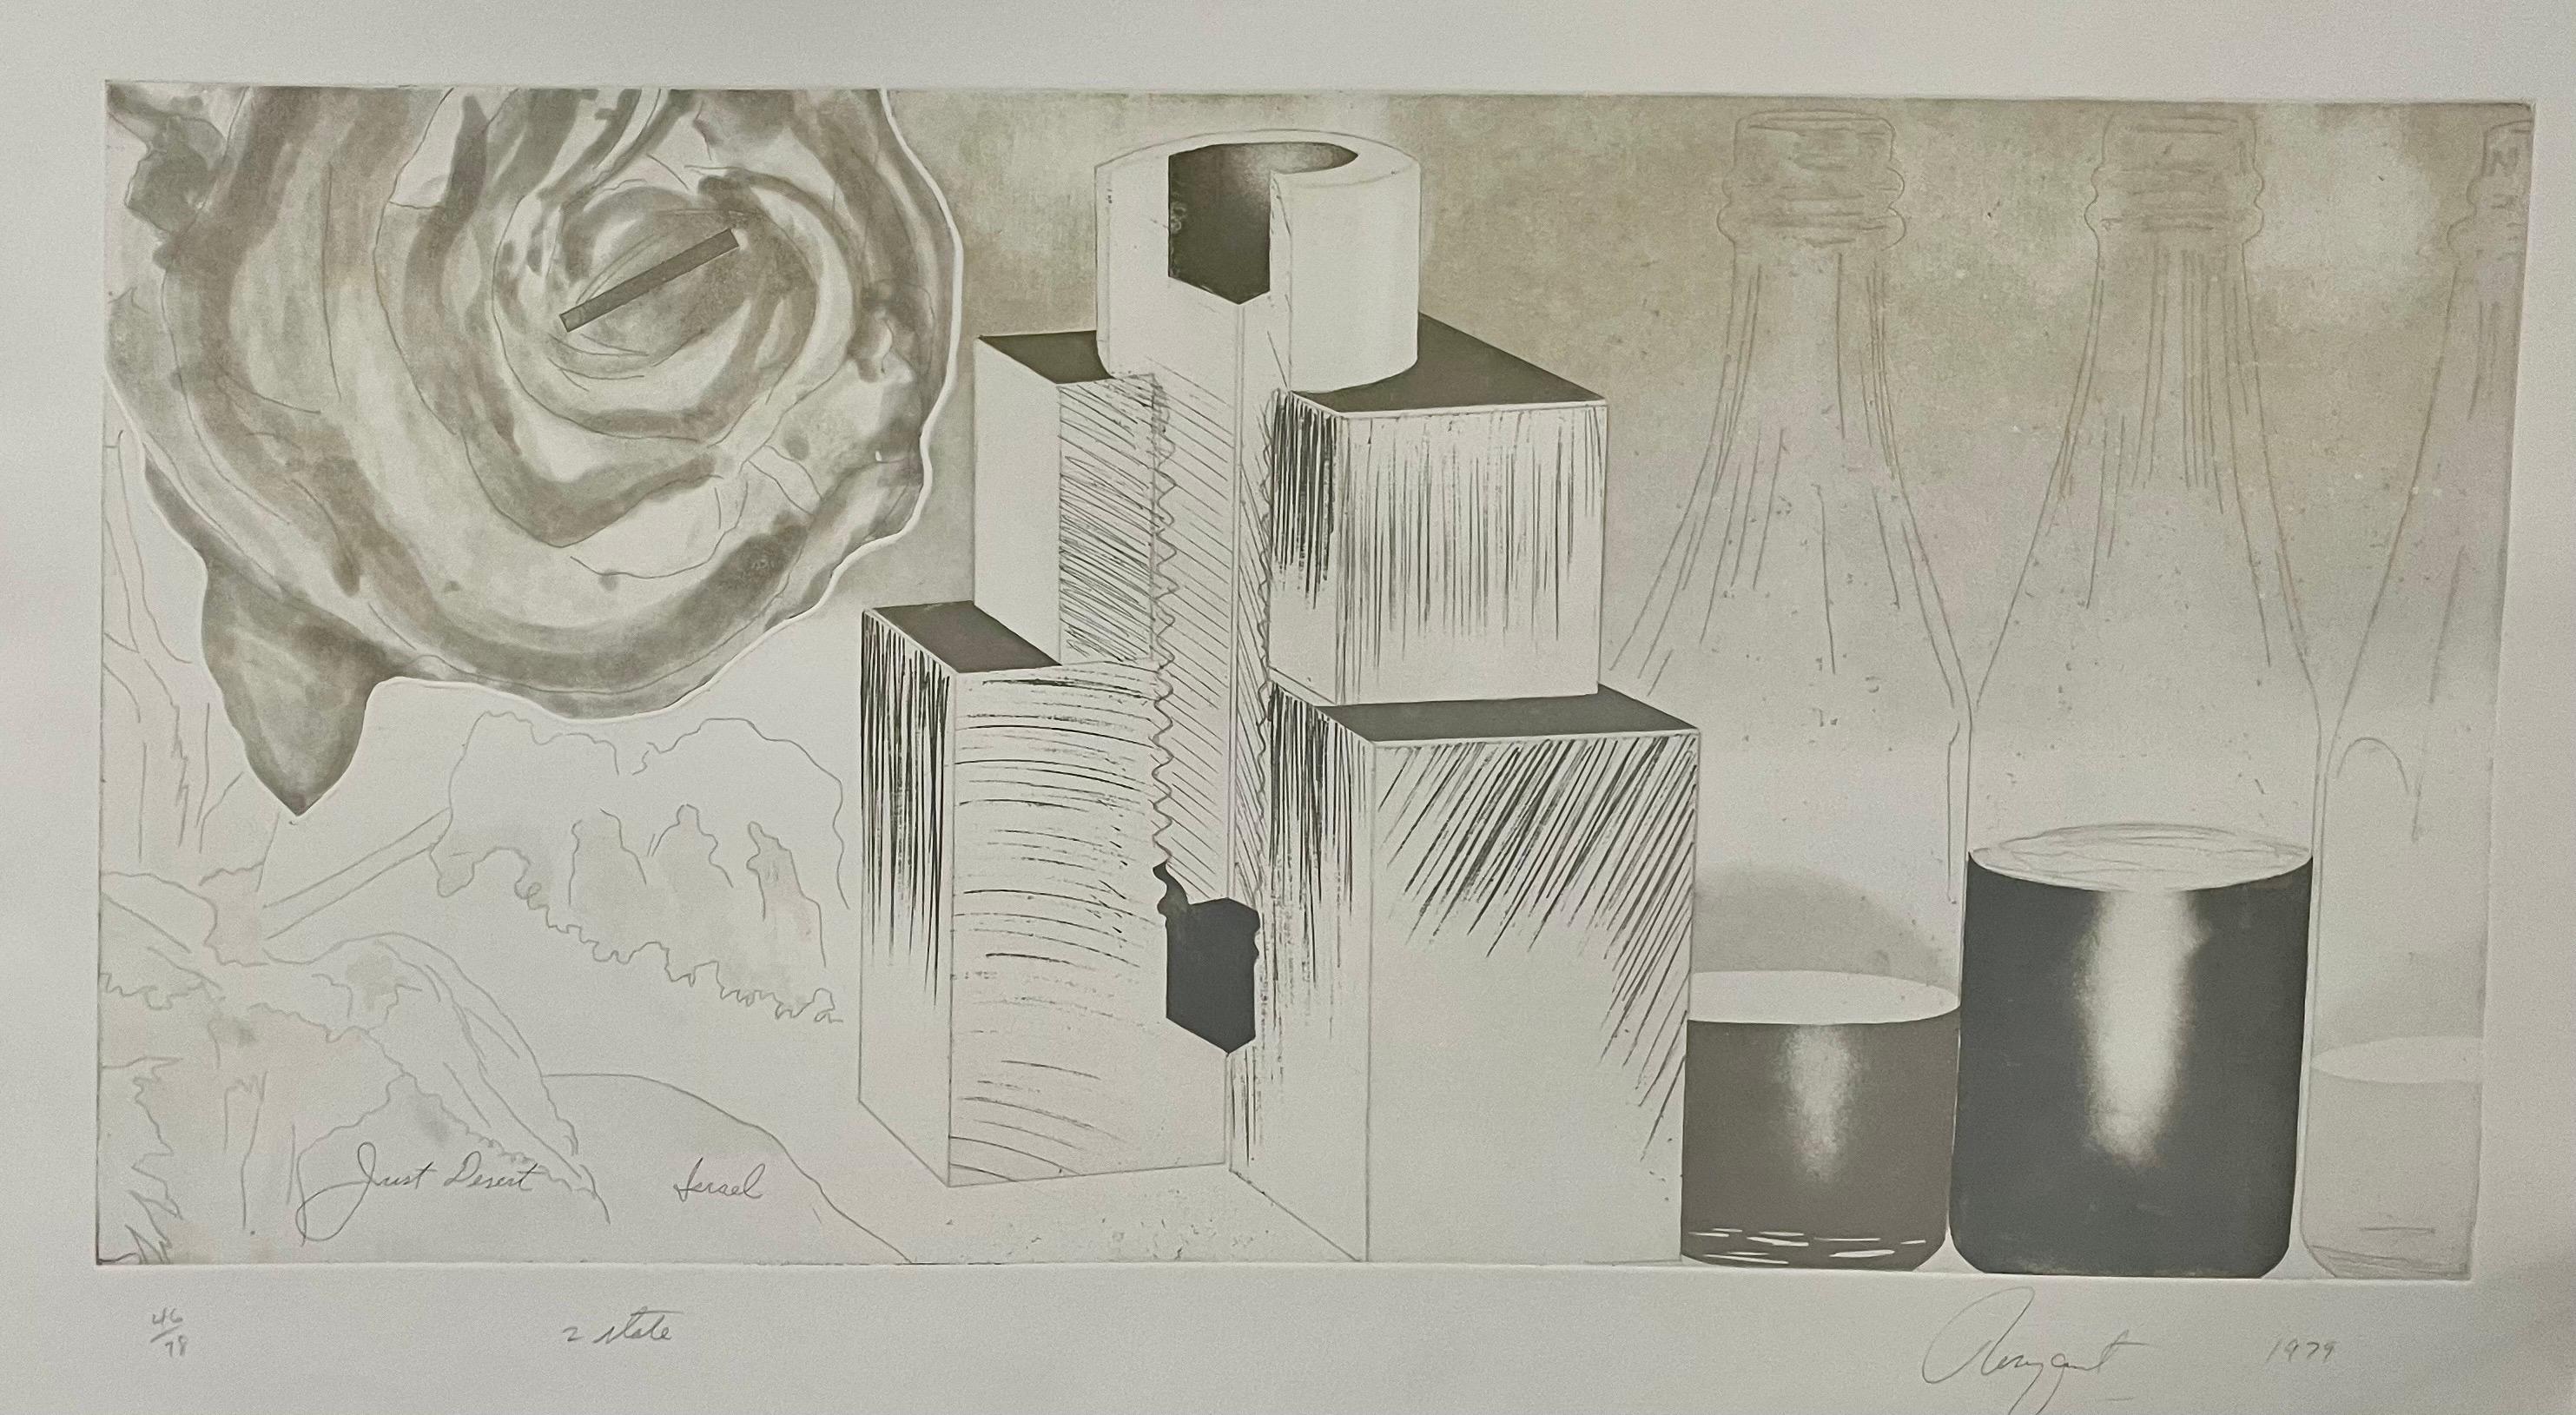 James Rosenquist (1933-2017)
Just Desert (2nd State) (1979, 1979
Etching and aquatint on Pescia Italia paper
Printed by Aripeka, Ltd., Aripeka. Published by Multiples, Inc., New York. Glenn 145A.
Sheet dimensions: 23 X 40
Provenance: collection of